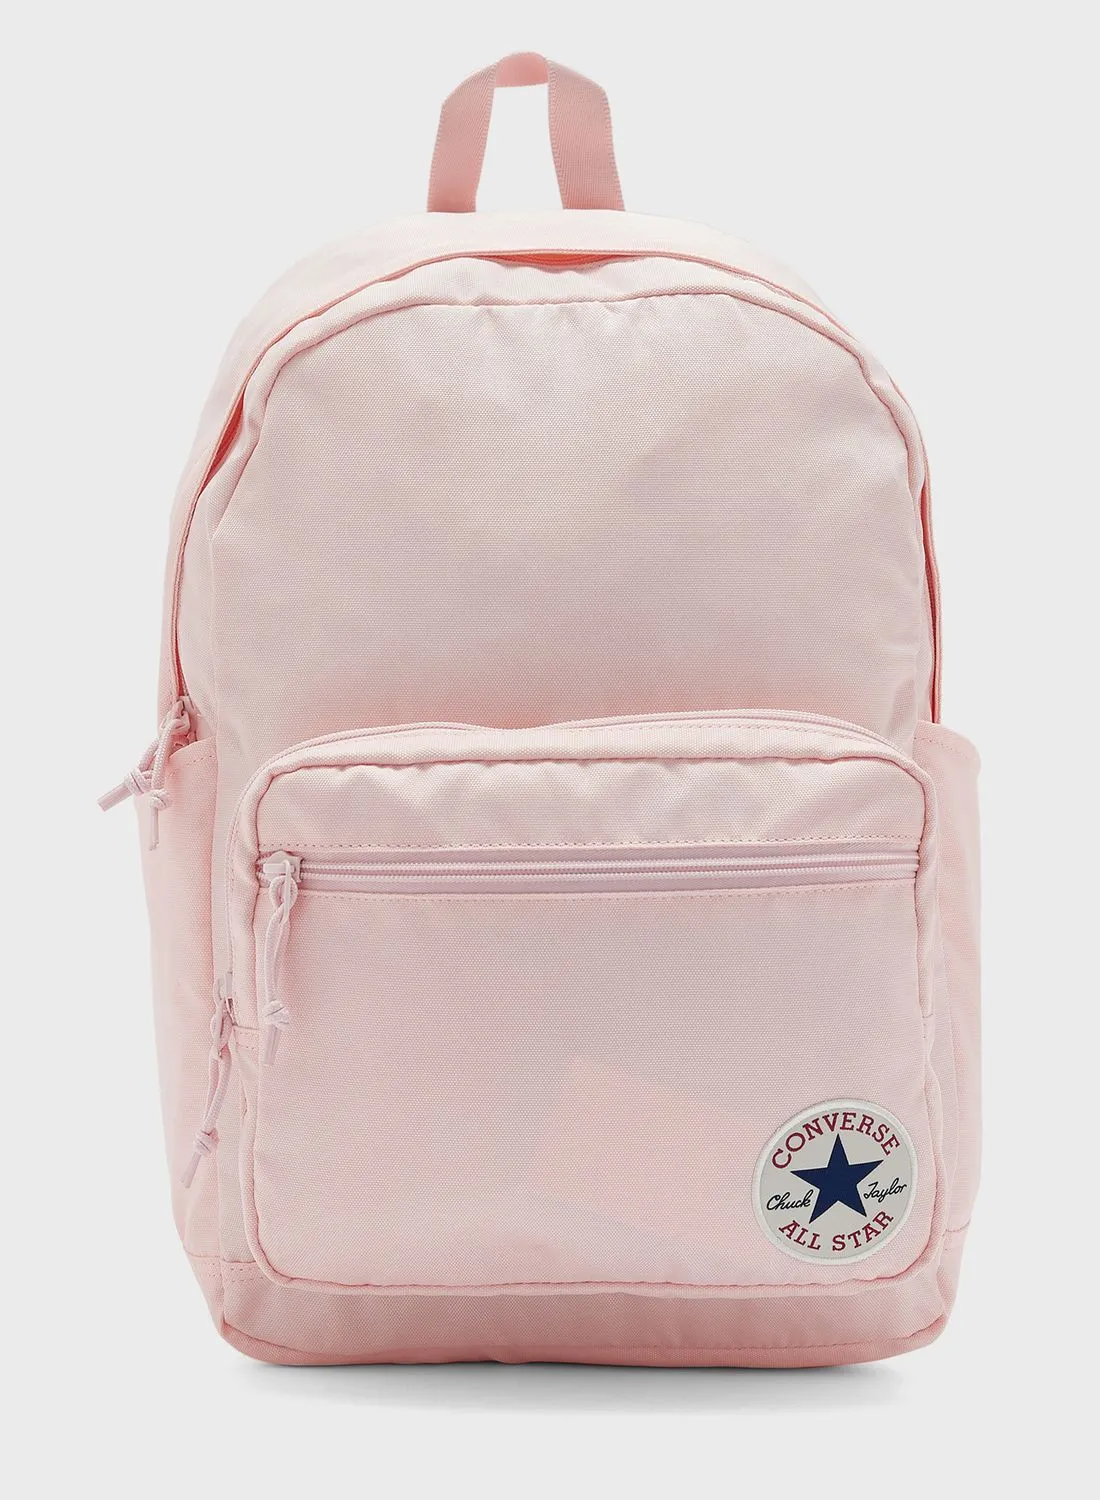 CONVERSE Go 2 Backpack